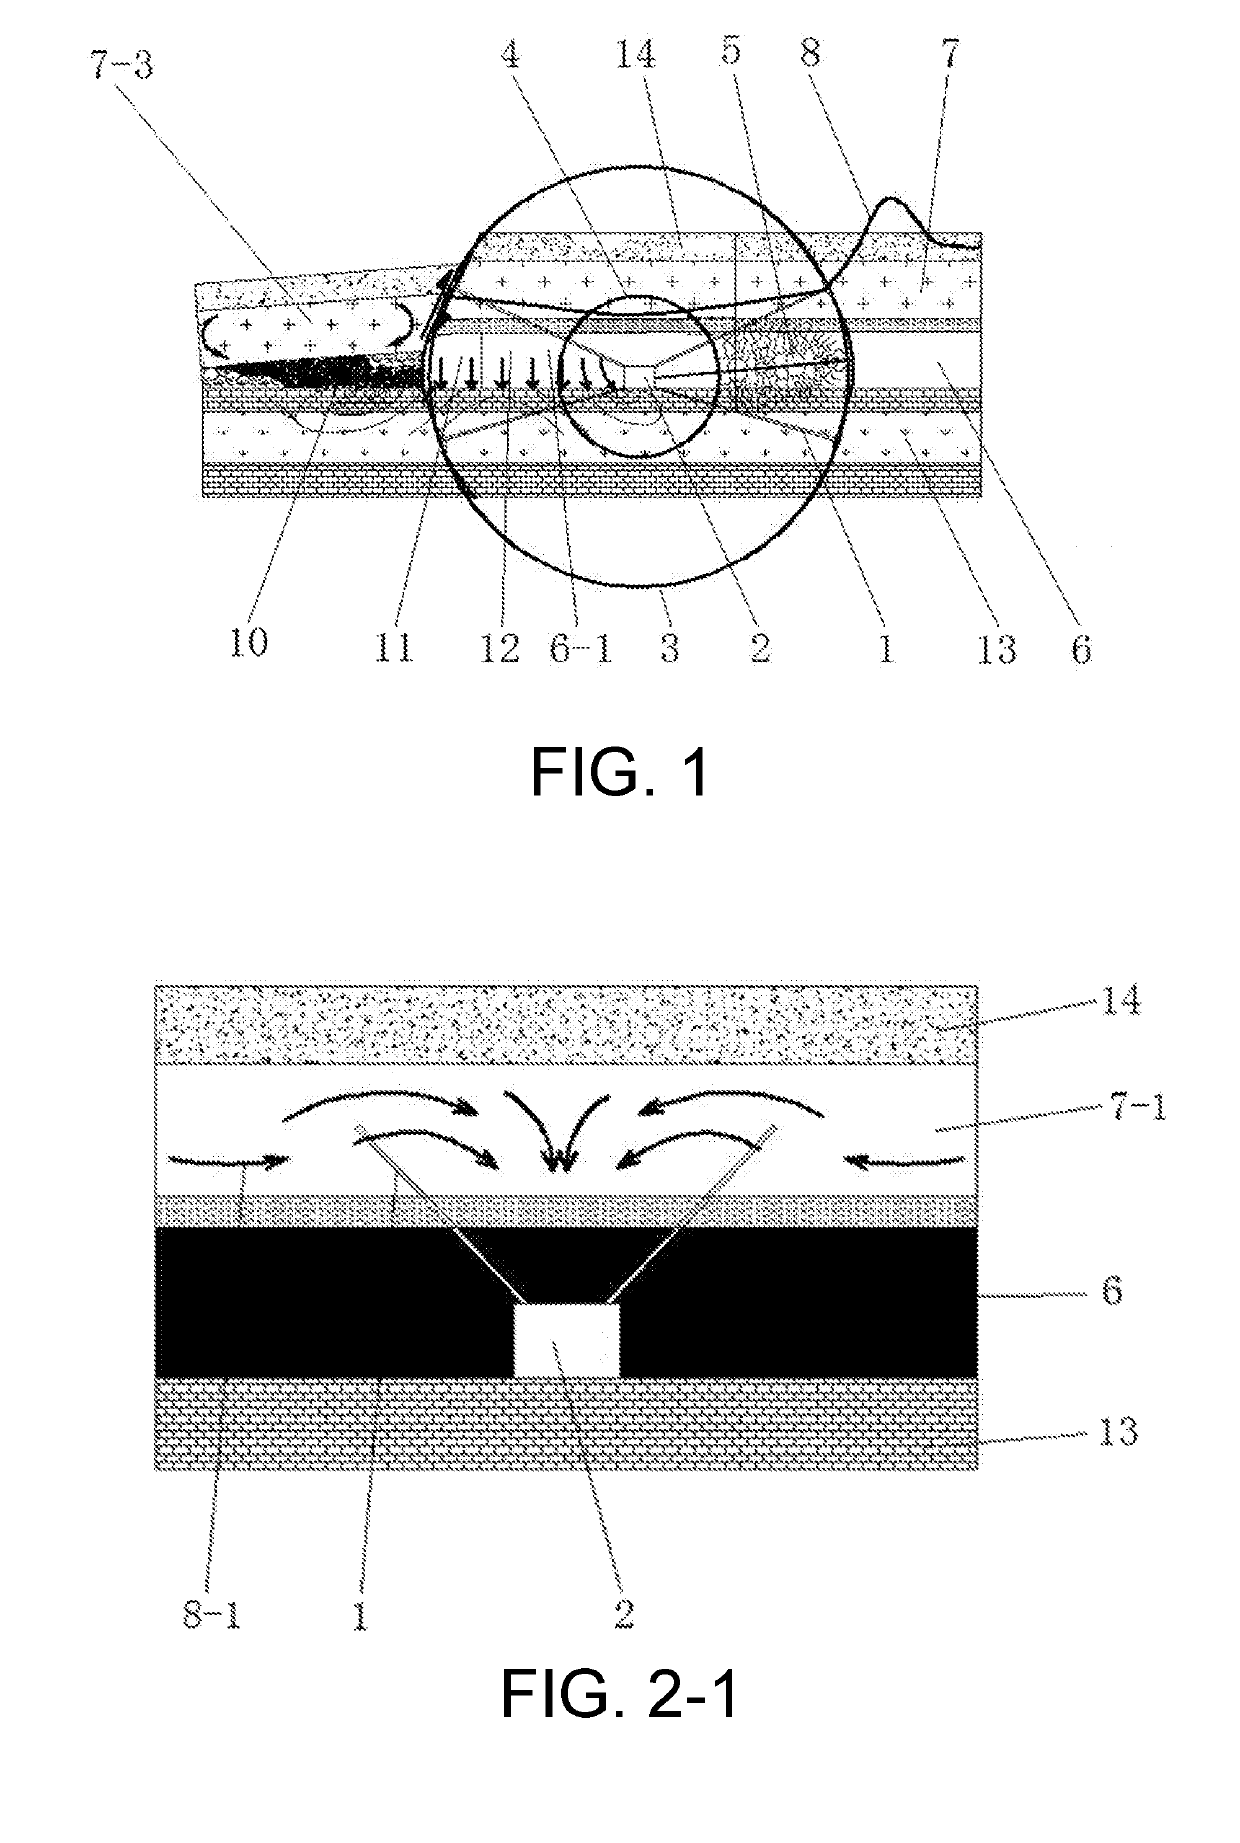 Stress-transfer method in tunnel with high ground pressure based on fracturing ring